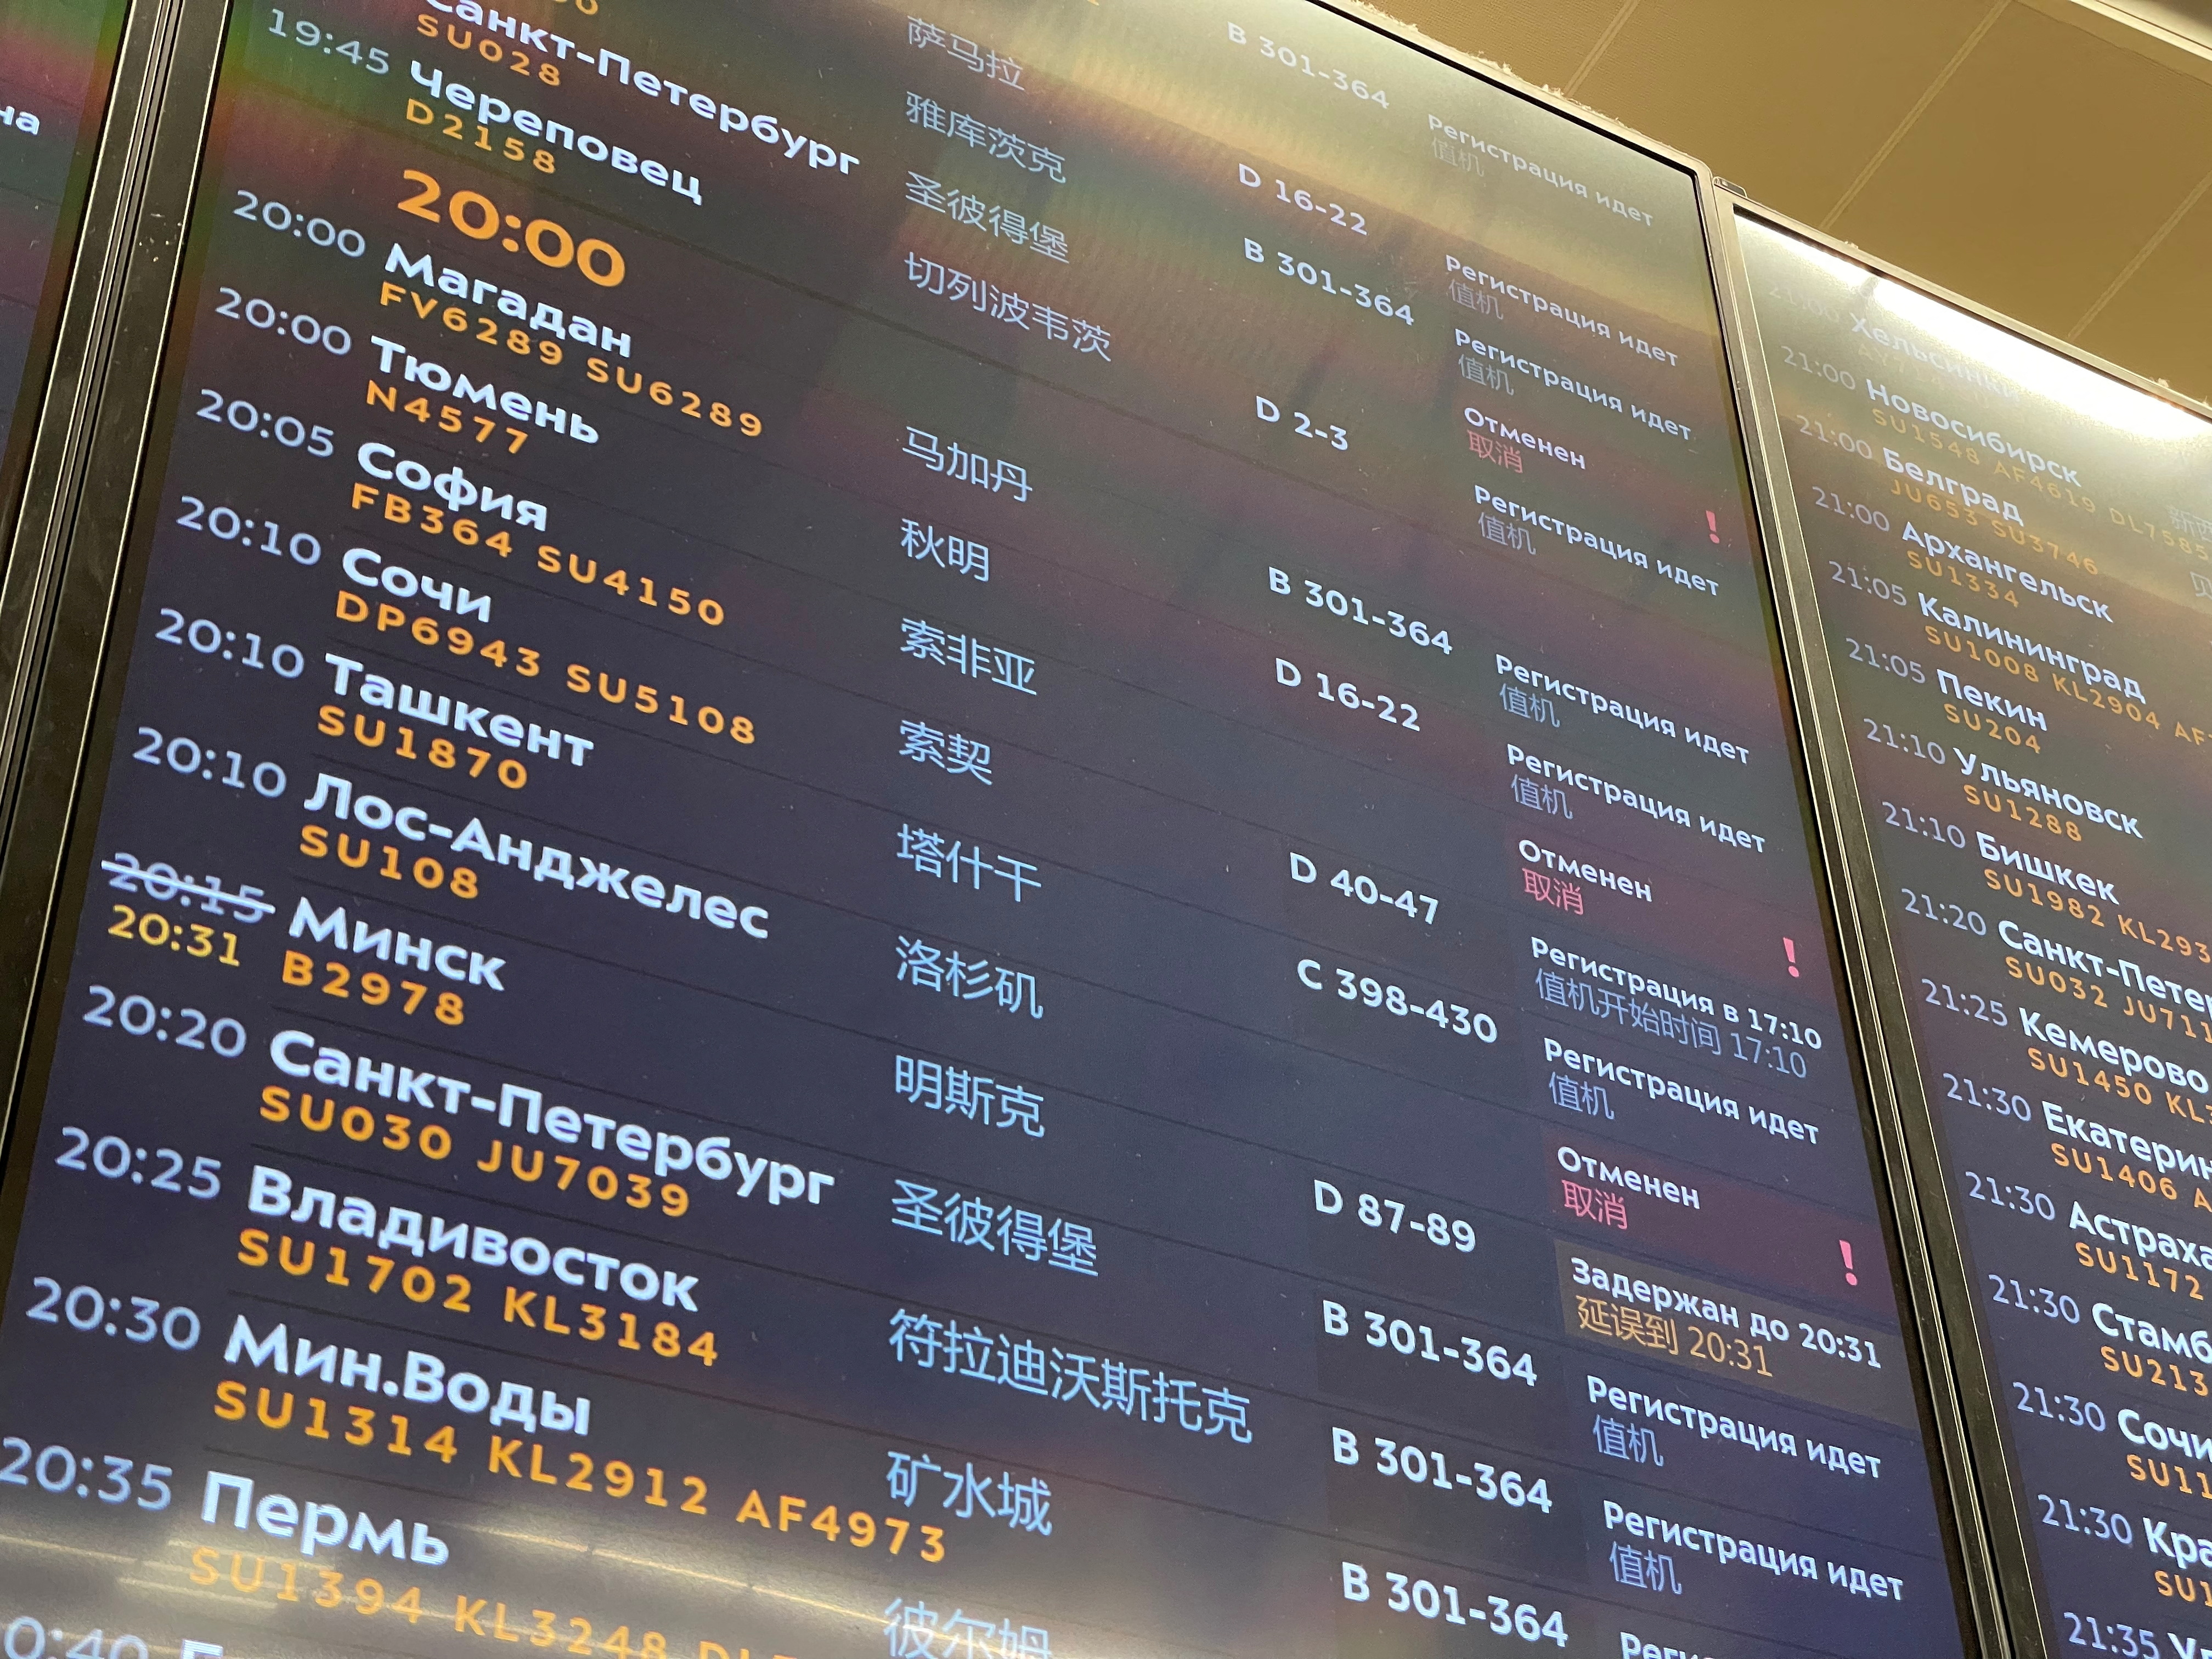 A view shows a departures board at Sheremetyevo airport in Moscow